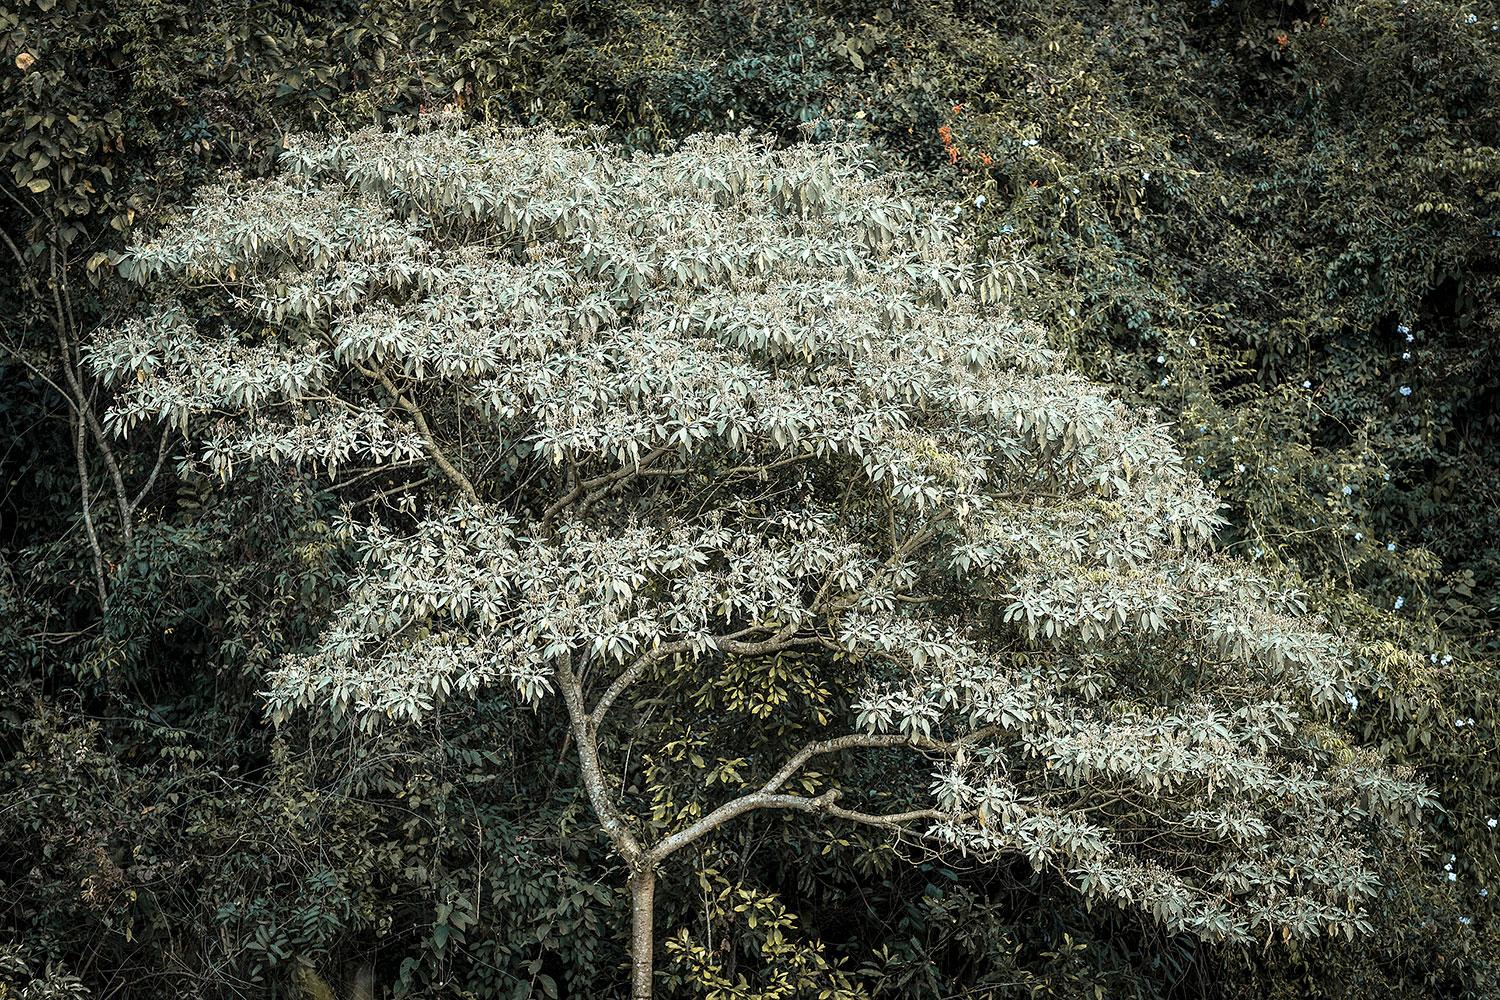 Daniel Mansur
Brumadinho Tree, 2015

40 x 60 inches 
100 x 150cm

Also available in:

47 x 71 inches 
120 x 180cm

60 x 88.5 inches
150 x 225 cm

Edition of 6 copies overall

Archival Pigment Print

Signature Label. Signed, titled, numbered and